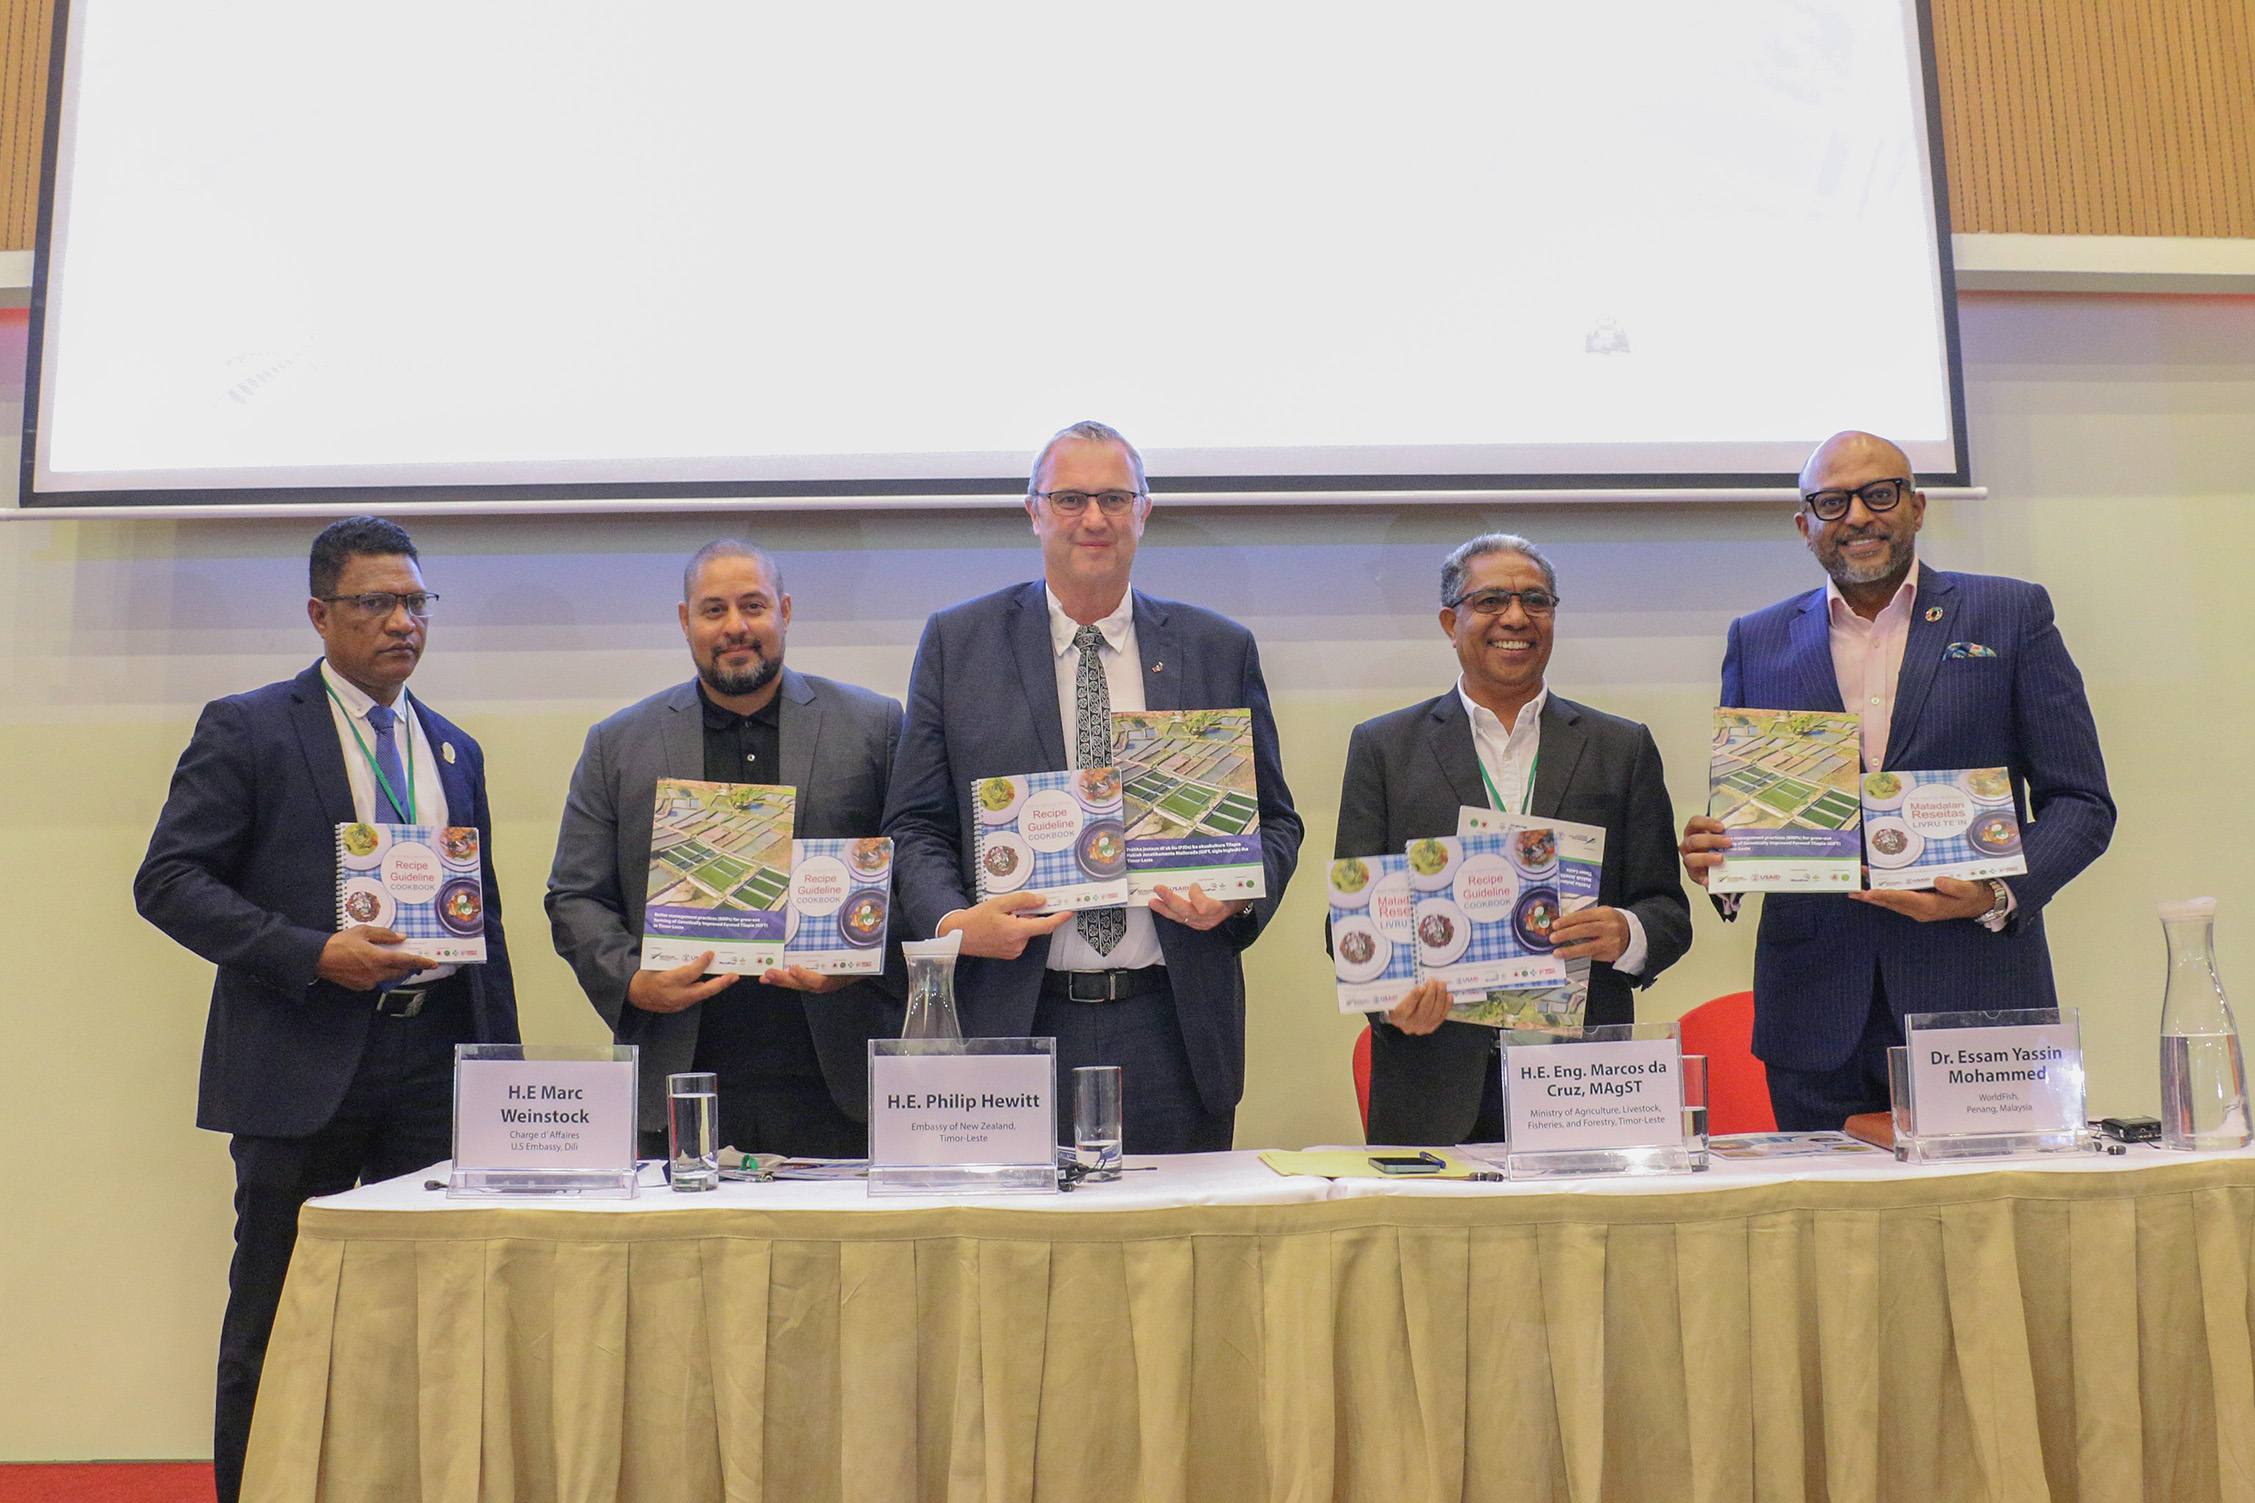 Two major publications were launched at the 3rd National Aquaculture Forum in Dili, Timor-Leste. 